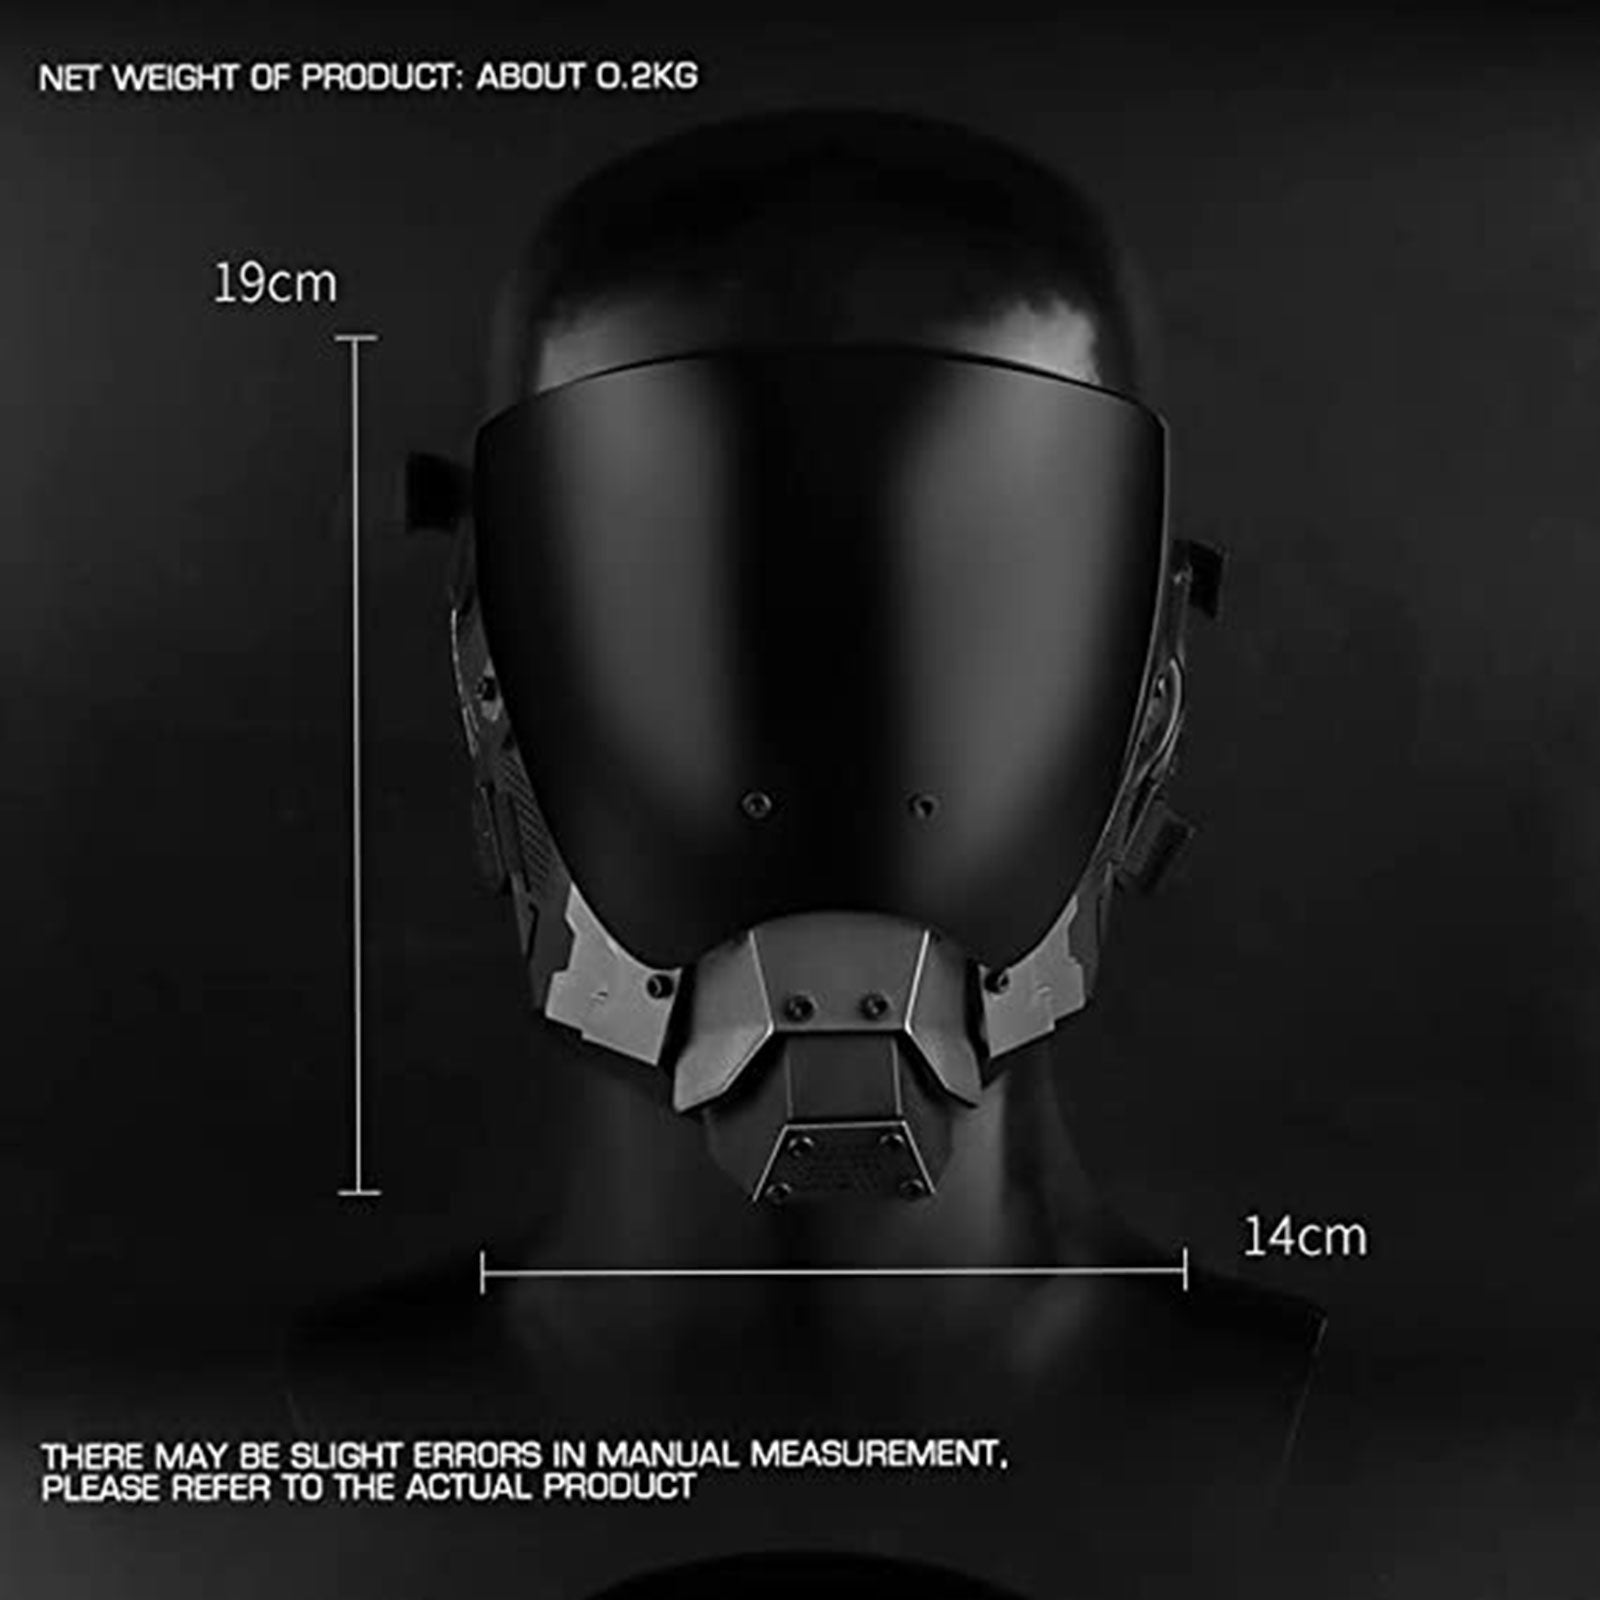 JAUPTO Punk Mask Helmet Cosplay for Men and Women, Futuristic Punk Techwear, Halloween Cosplay Fit Party Music Festival Accessories with Light